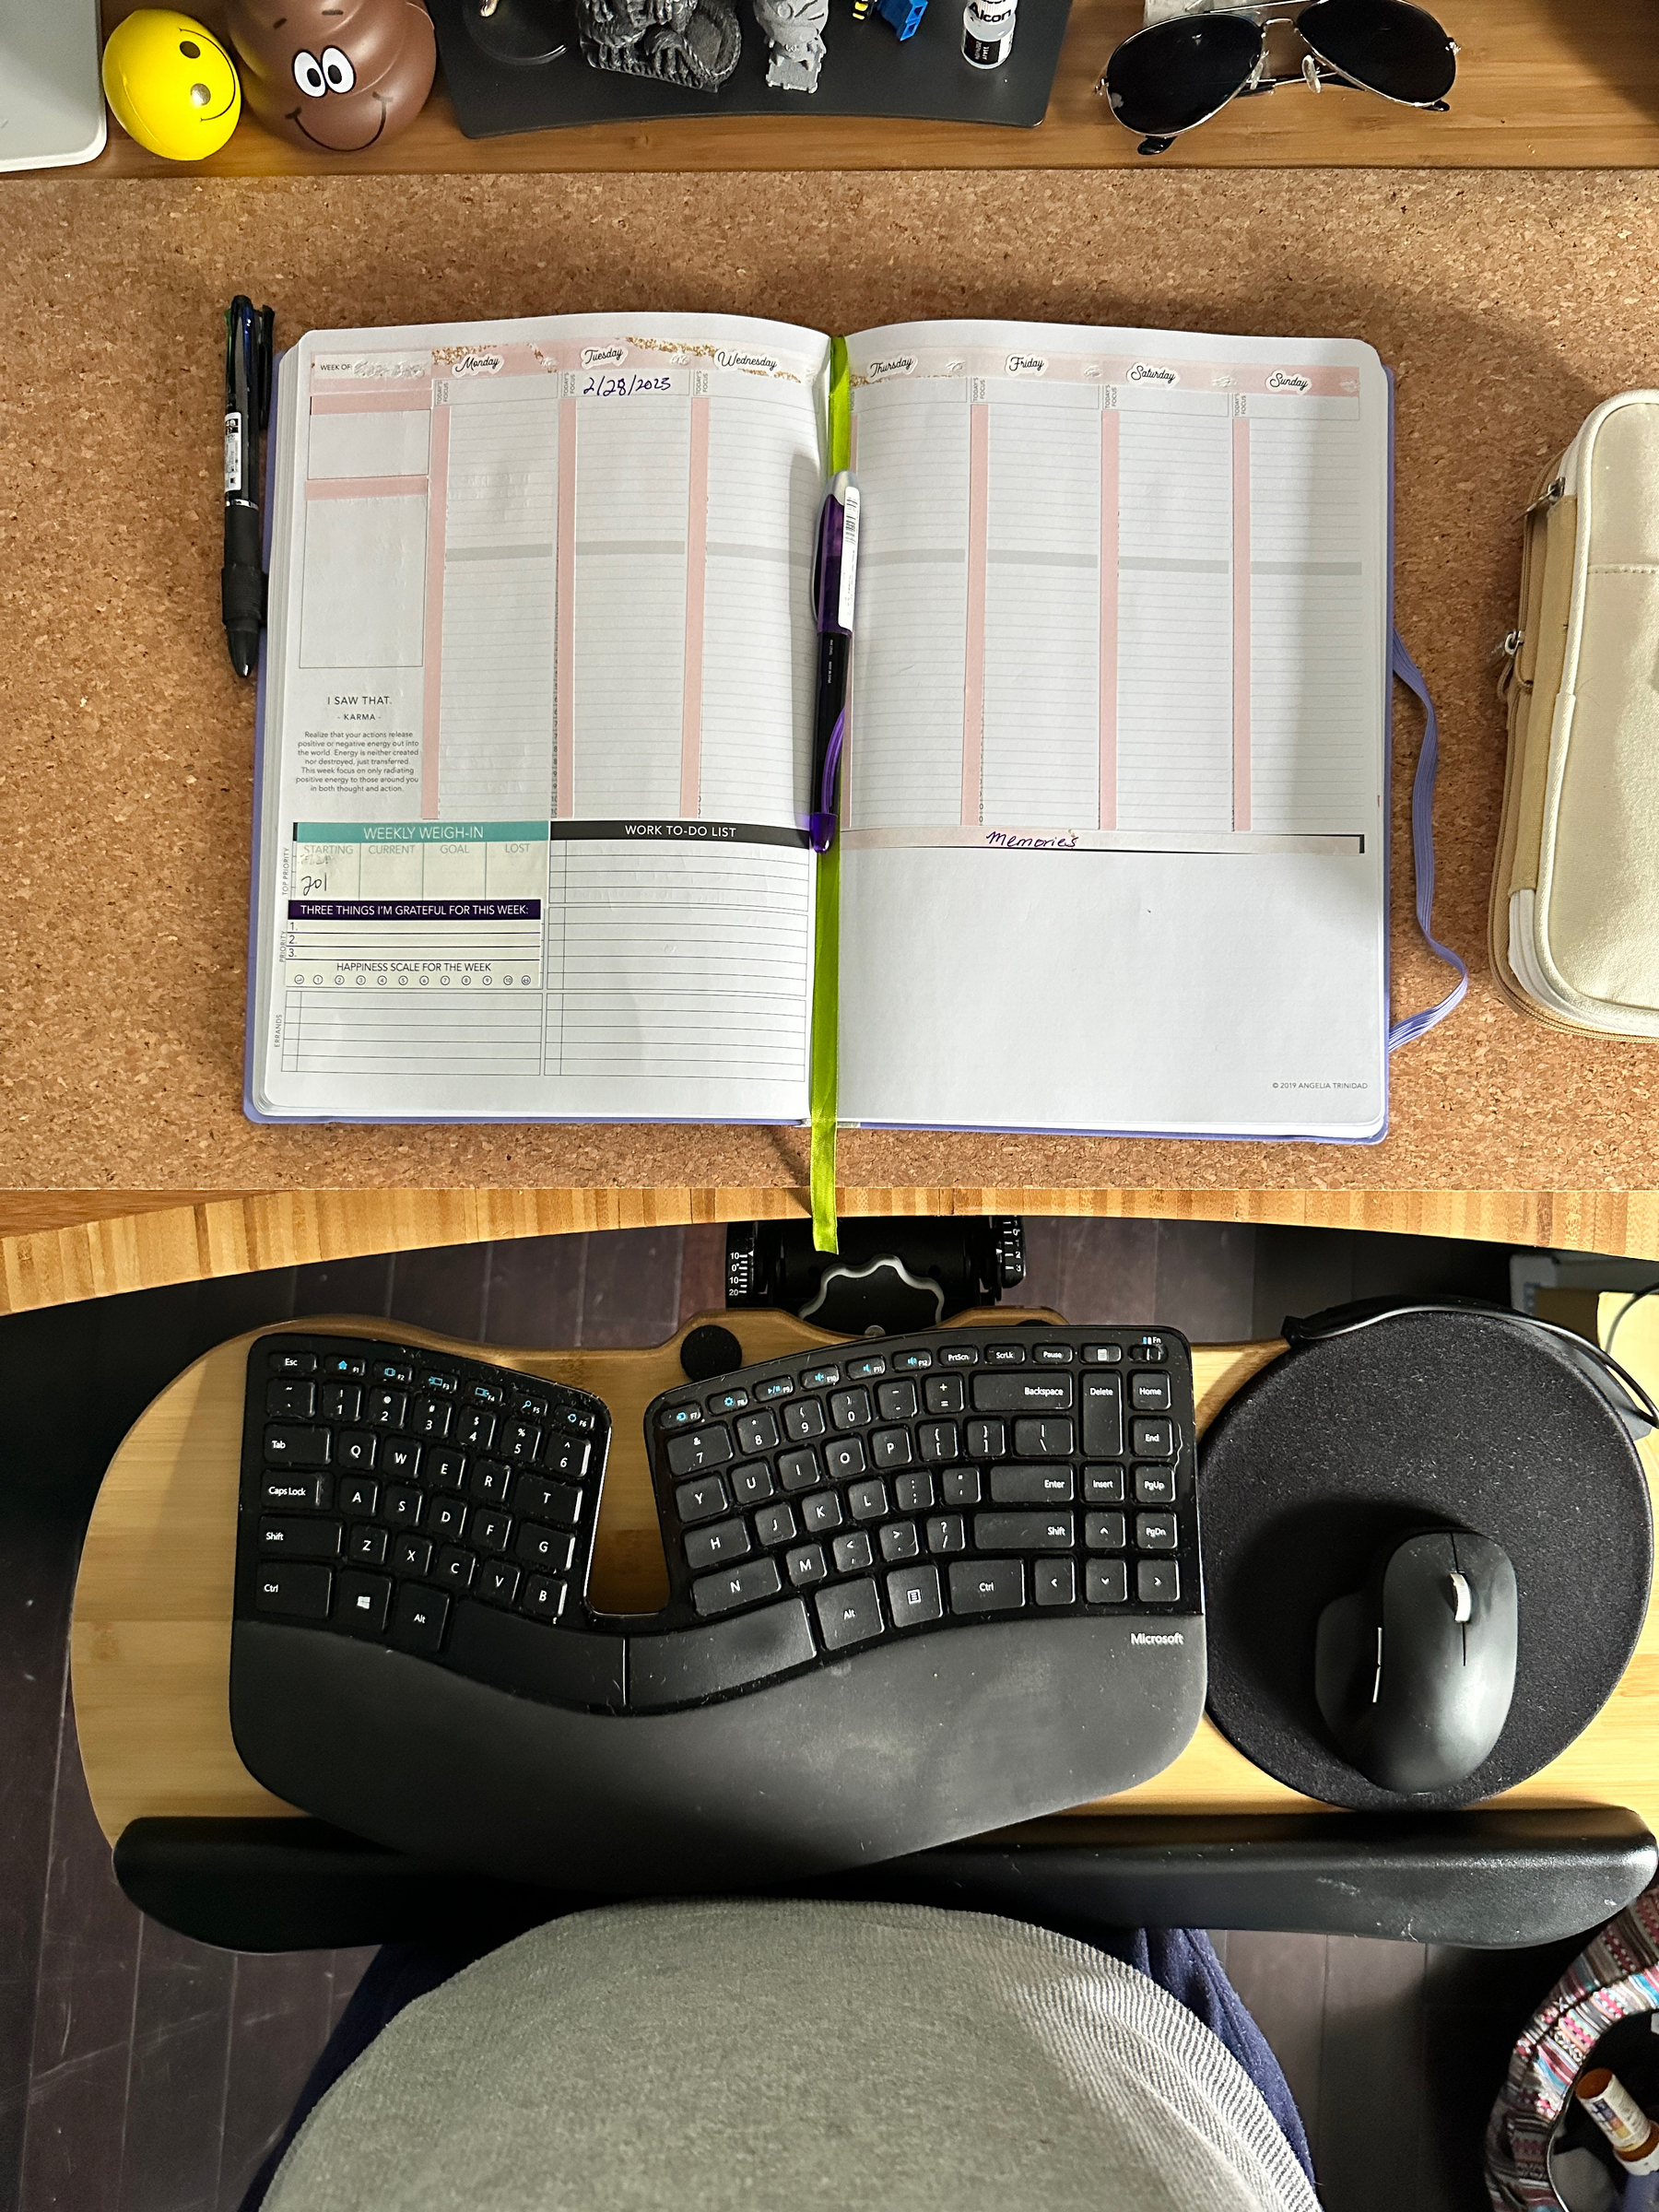 A top down view of a cork and bamboo standing desk. The author’s stomach can be seen in front of the split keyboard and mouse on a pullout tray. Above that is an open planner with a pen to the left and one in the center, a pencil bag to the right. Above that, various desk knickknacks including a shit emoji stress ball. 